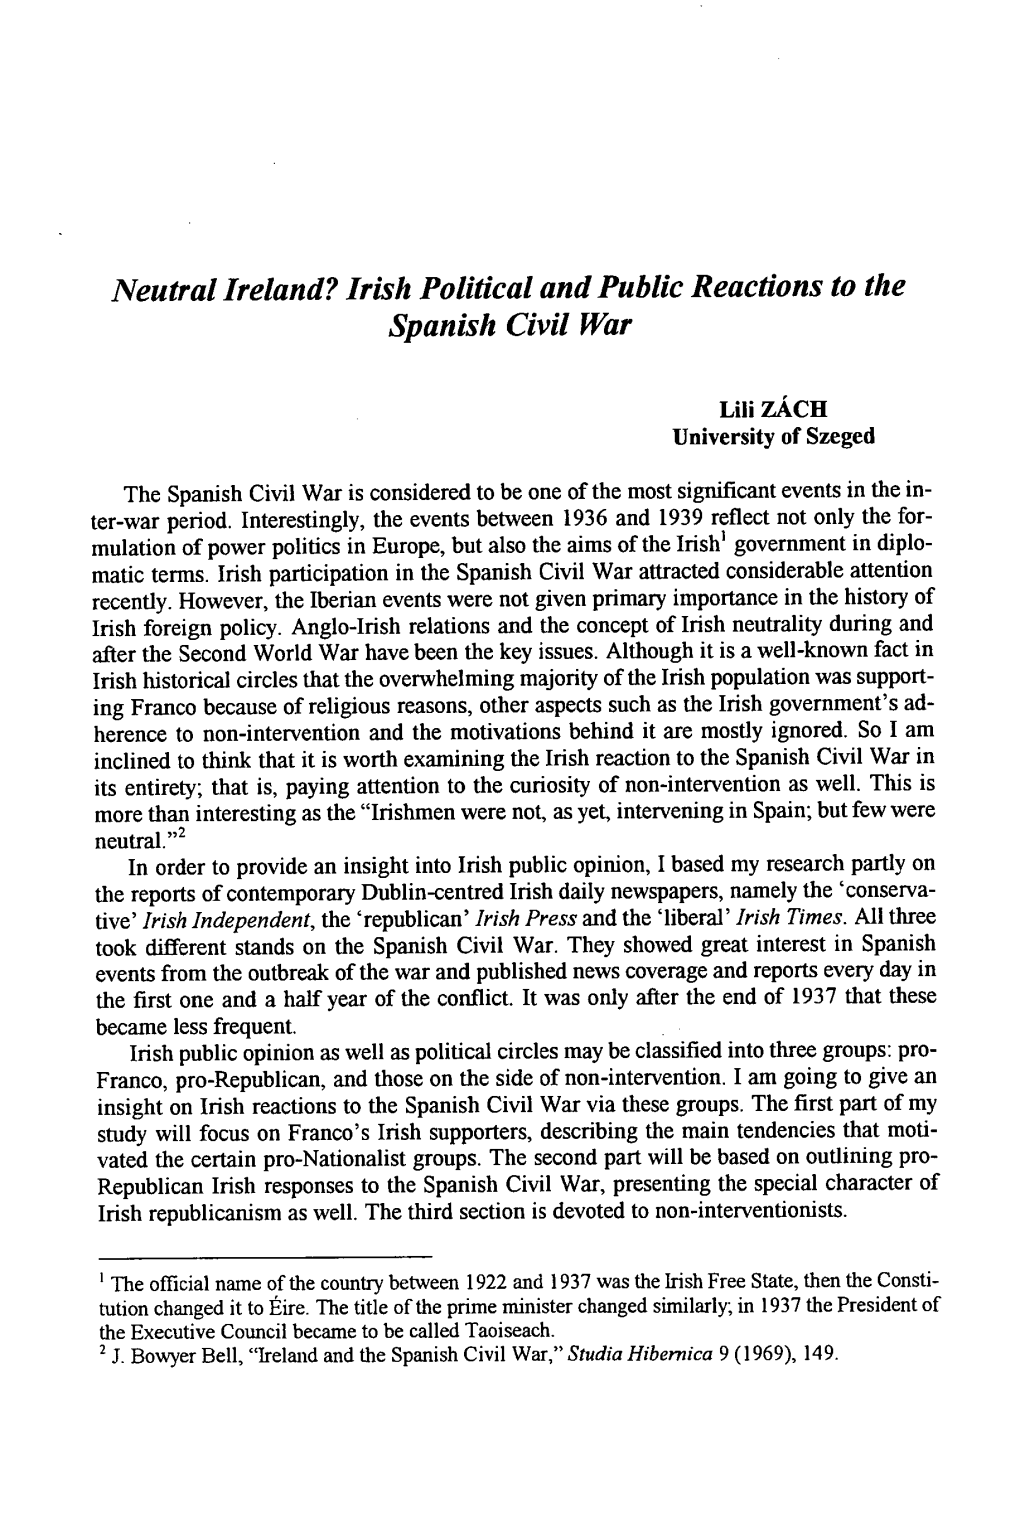 Irish Political and Public Reactions to the Spanish Civil War